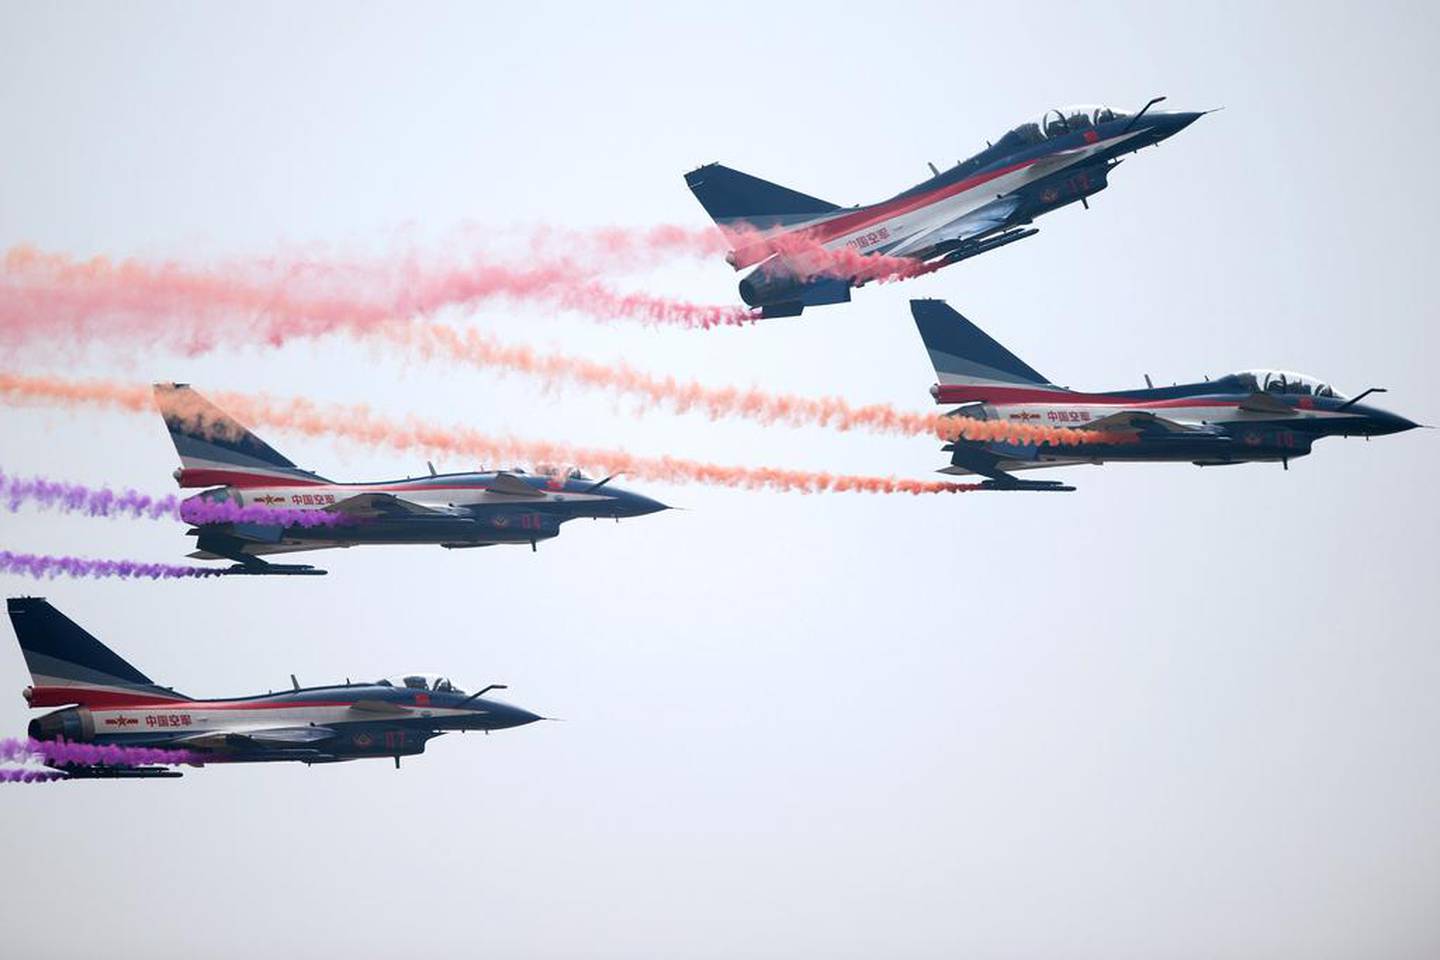 J-10 fighter jets of the Bayi Aerobatic Team perform at an airshow in 2014. AFP